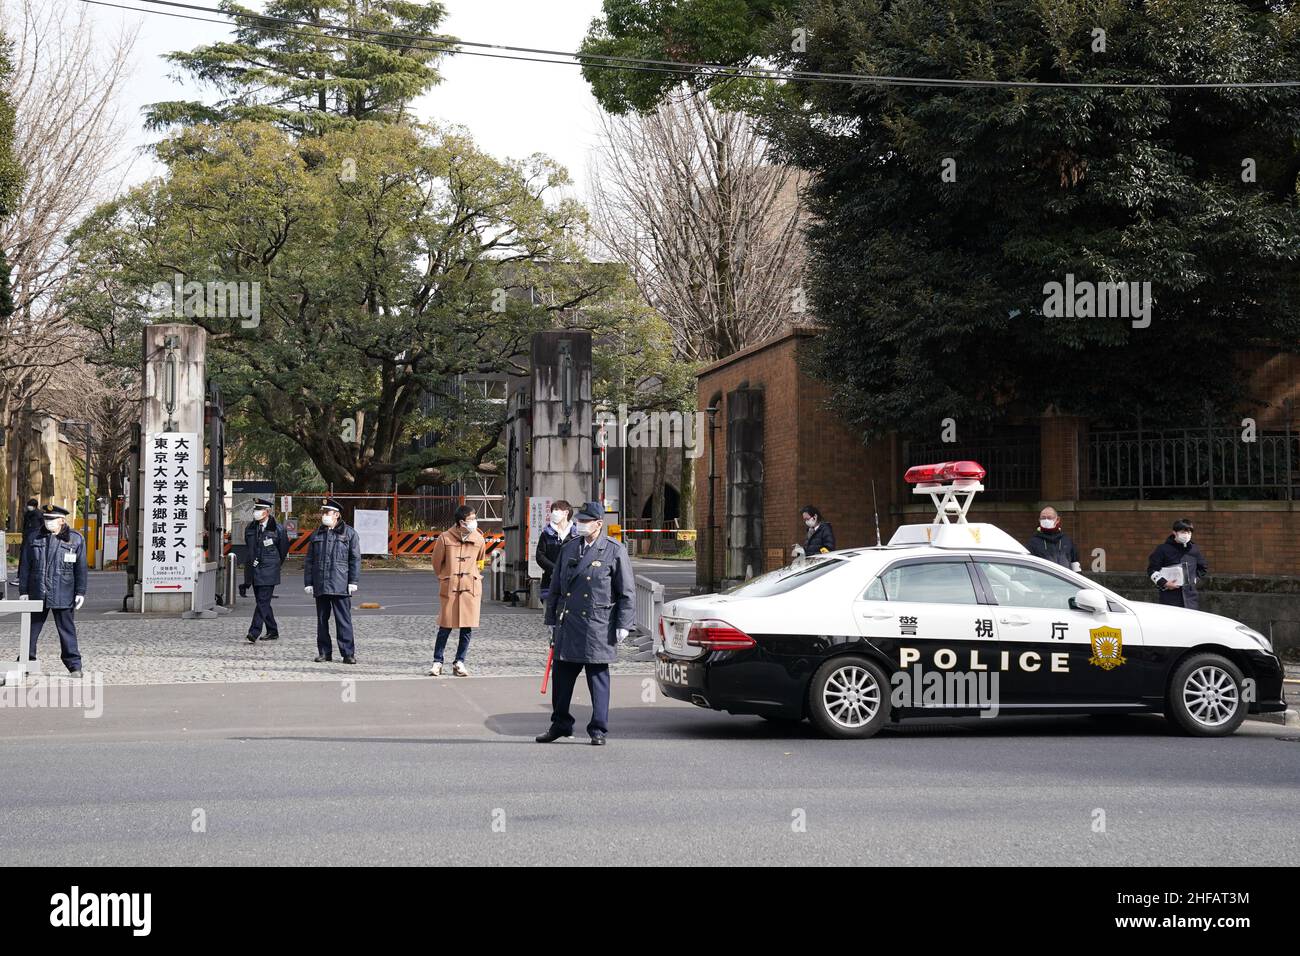 Tokyo, Japan - Police officers and security stand in front of University of Tokyo where a 17-year-old man attacked three individuals with a knife during the nationwide unified university entrance exams in Tokyo, Japan on January 15, 2022. Credit: AFLO/Alamy Live News Stock Photo